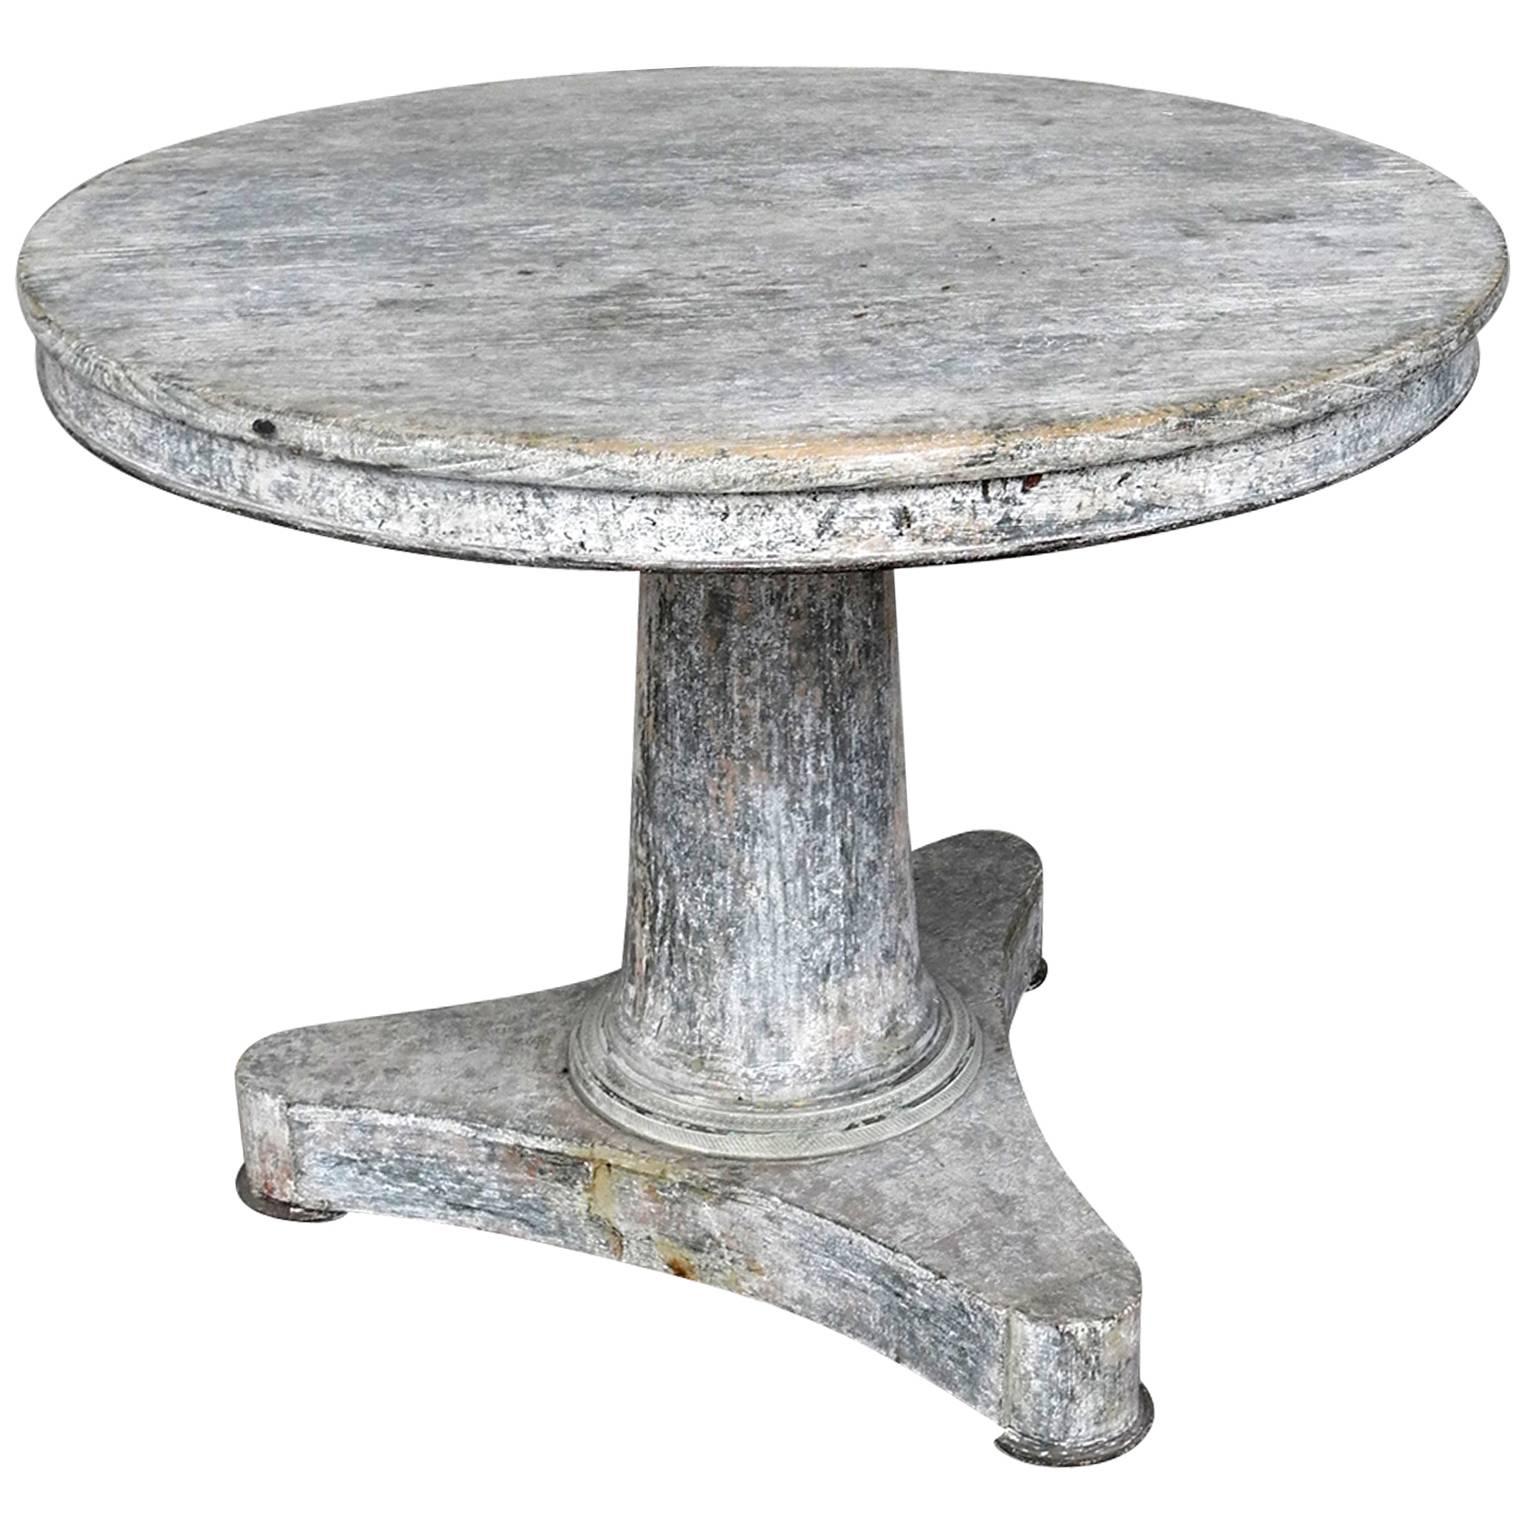 Antique 19th Century Round Swedish Table with White Bleached Finish  For Sale